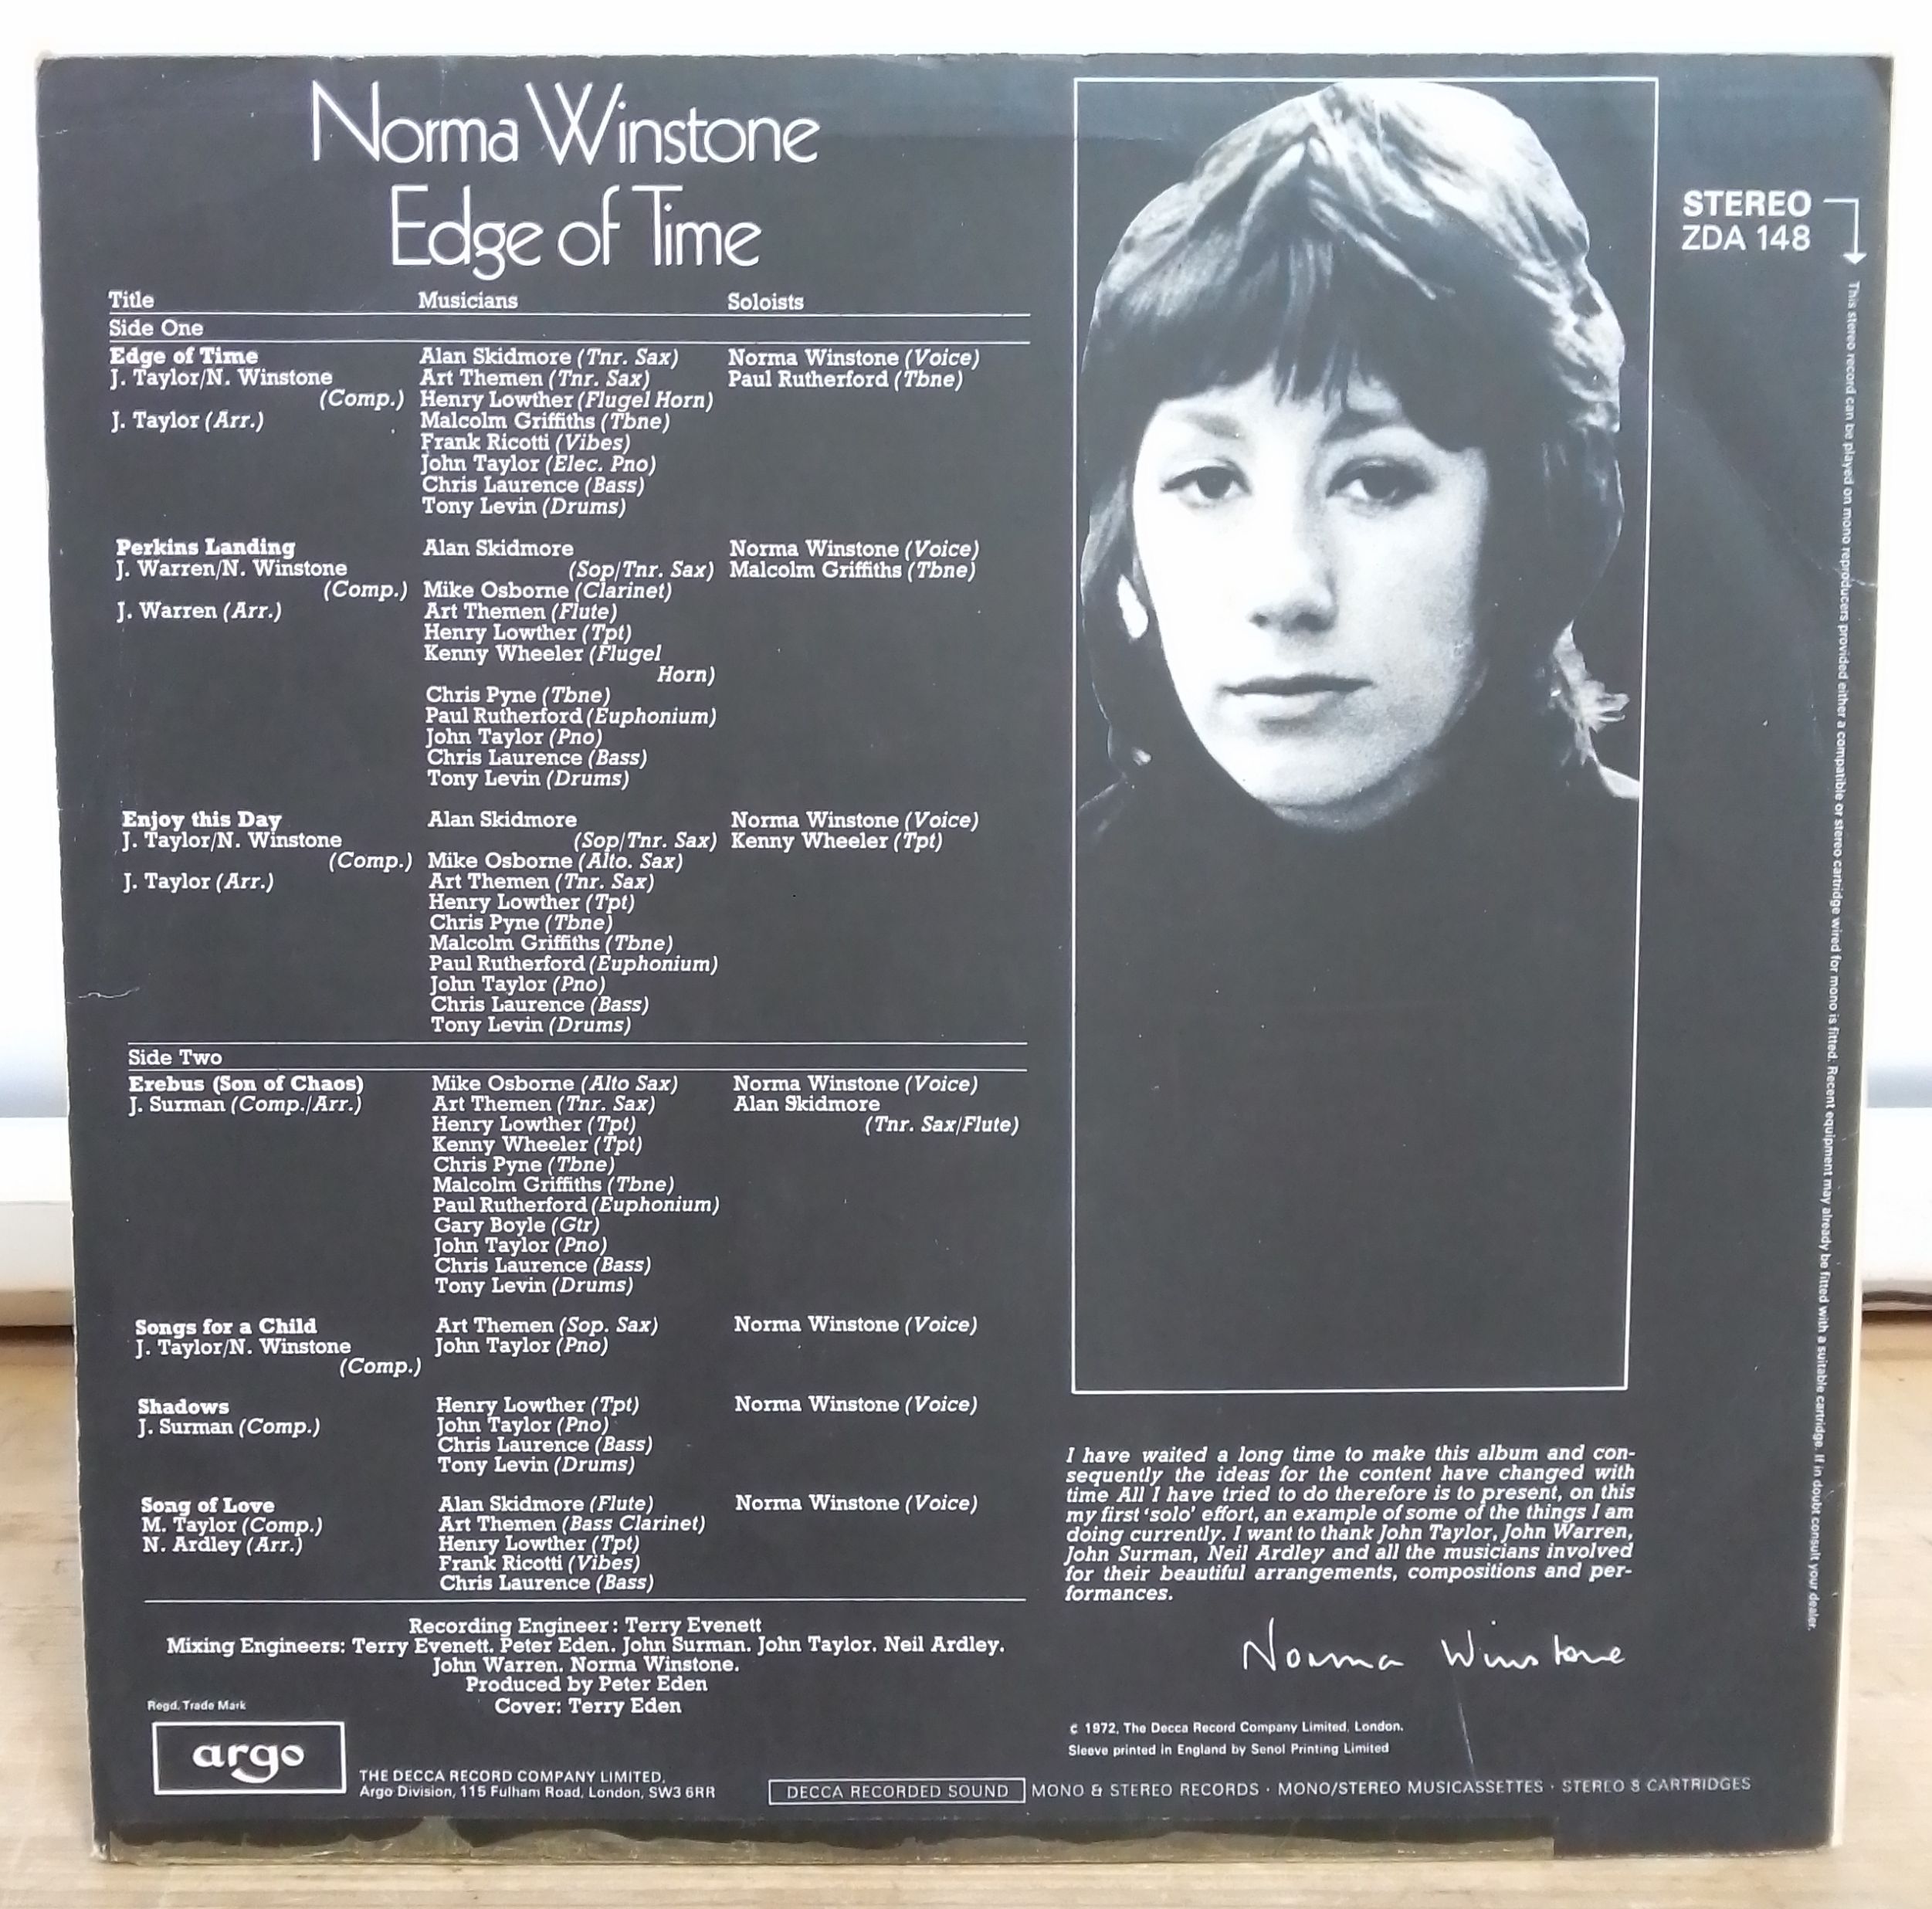 Norma Winstone - Edge of Time, stereo LP, 1st pressing, UK 1972, ZDA 148, ex library copy. - Image 2 of 4